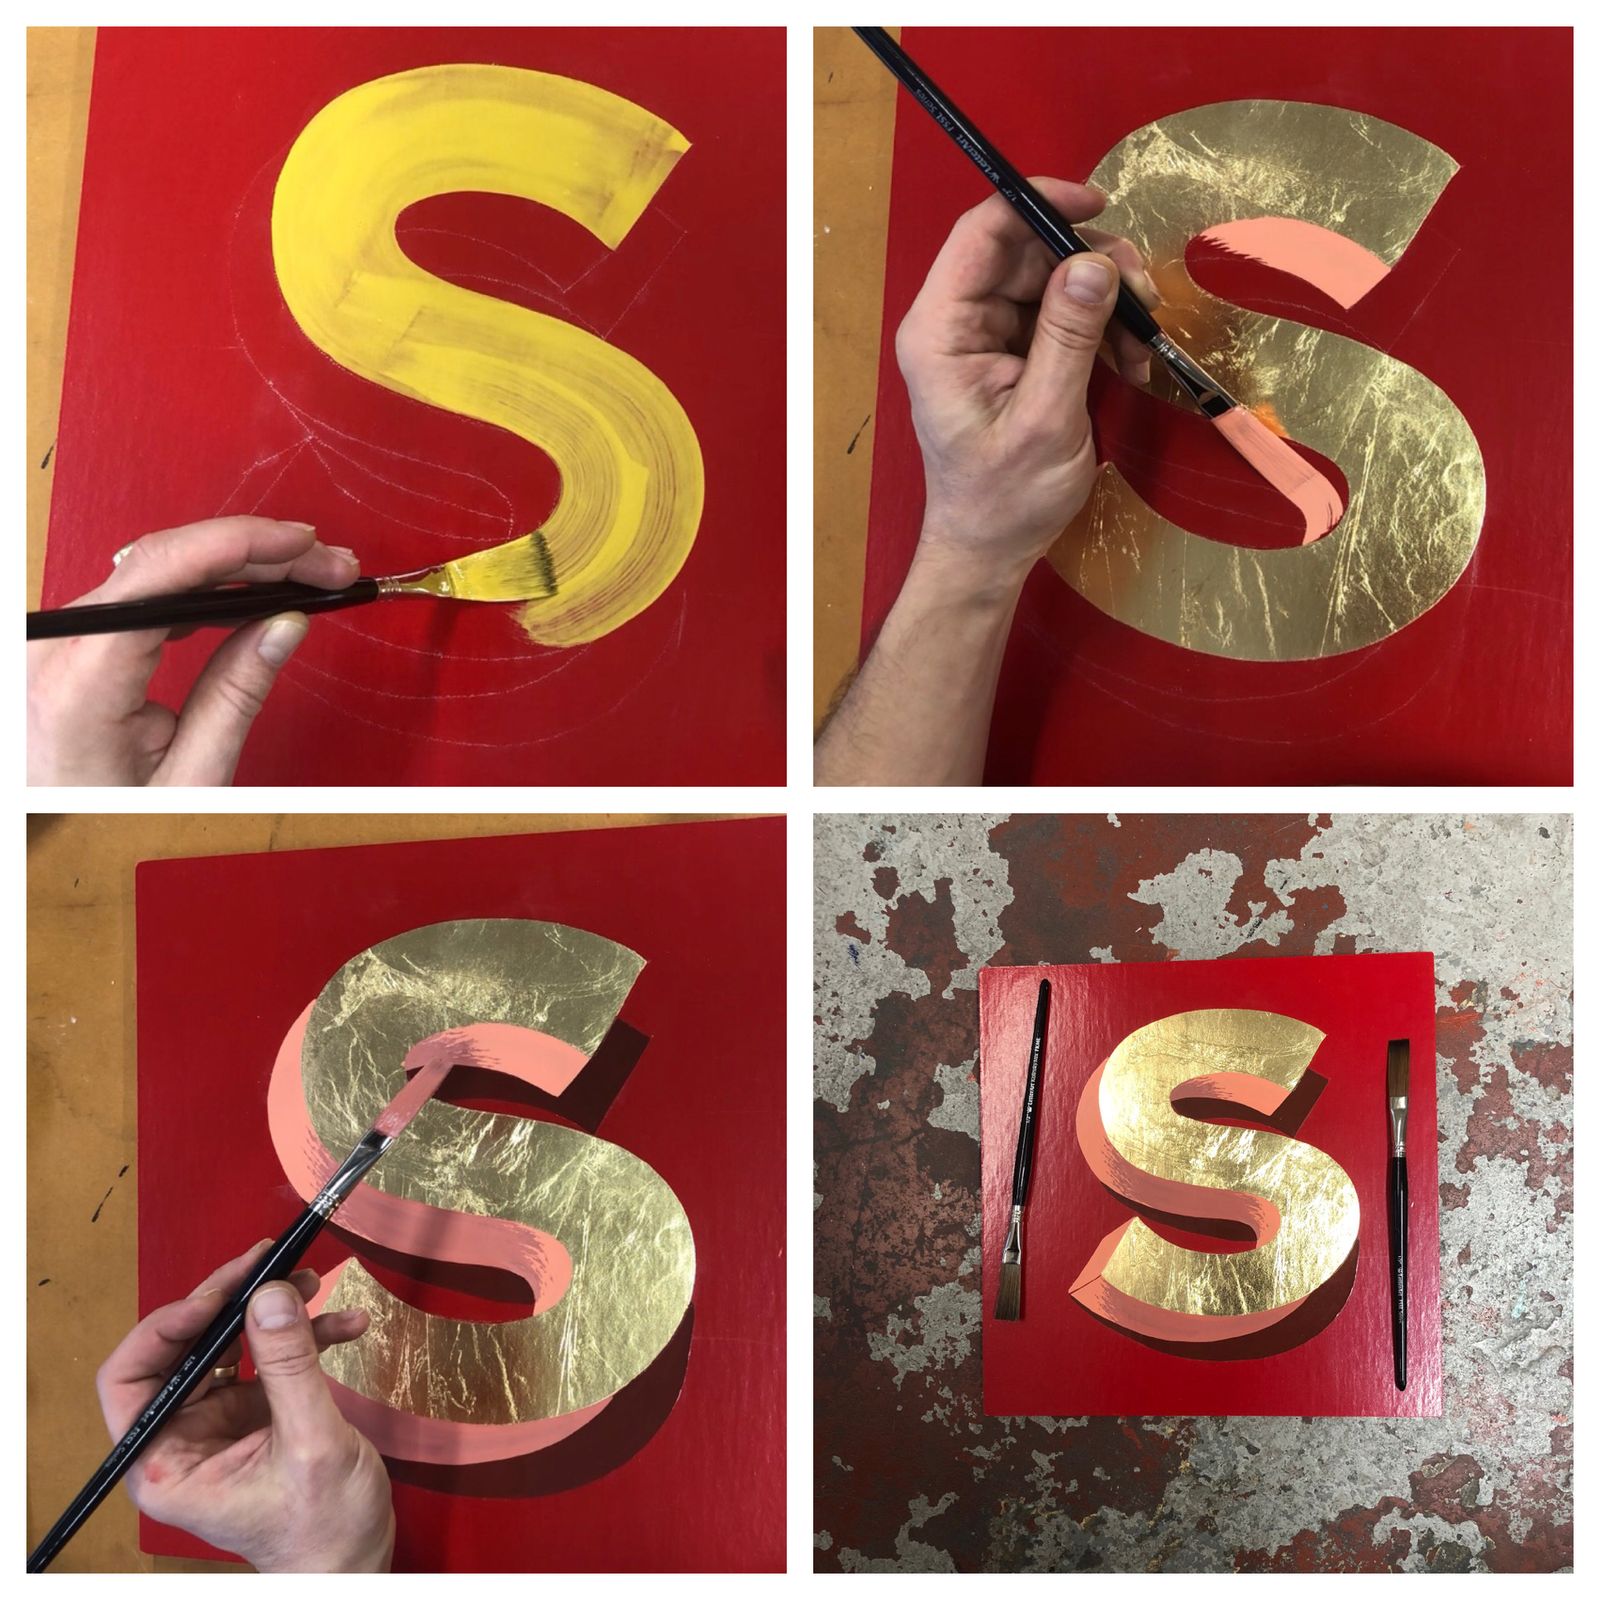 Step-by-step photos showing gilding and painting of a letter 'S'.